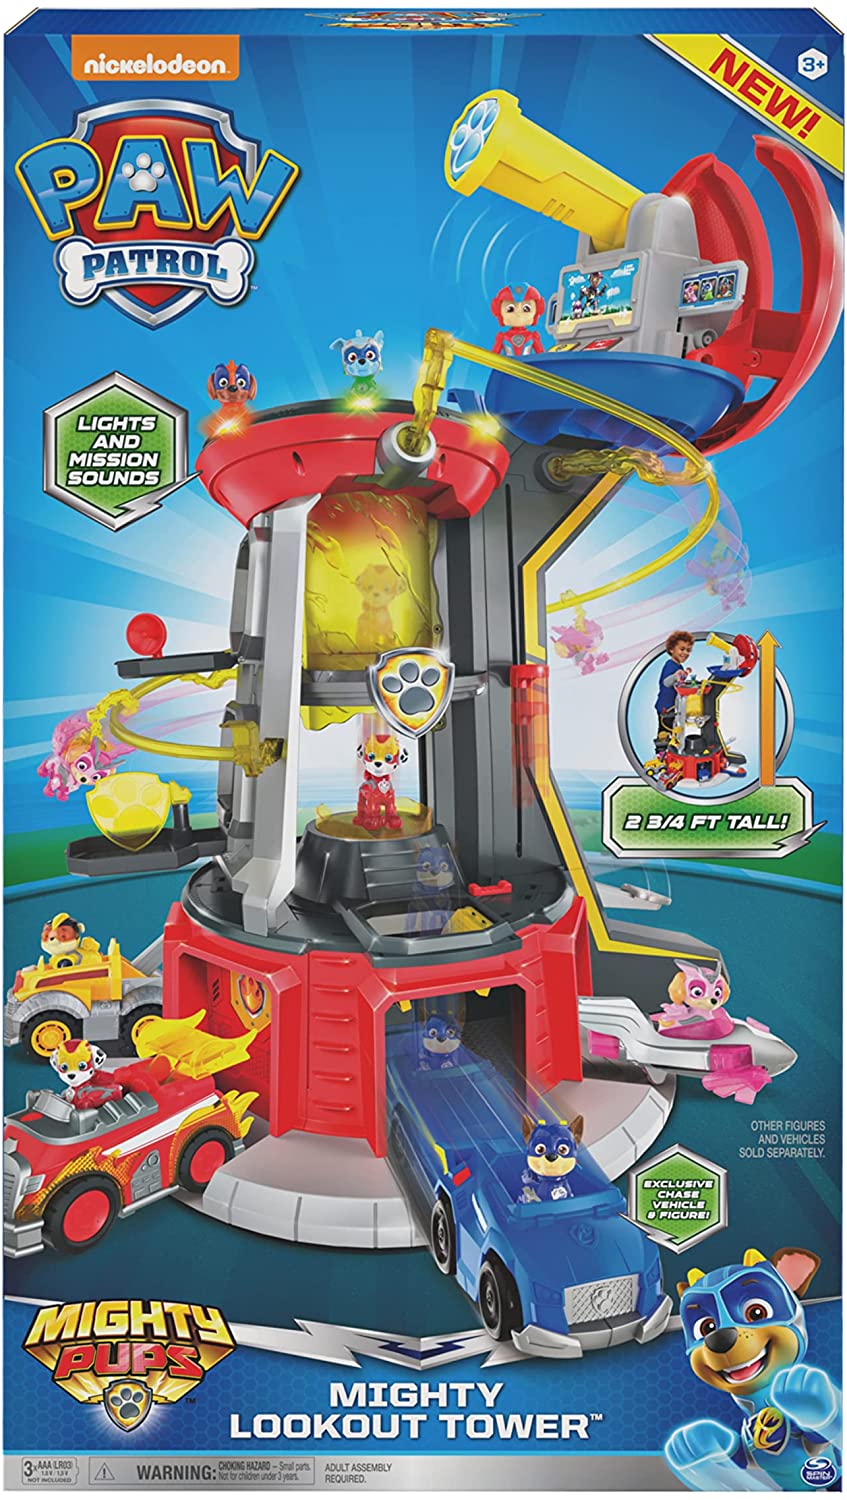 Paw Patrol Mighty Pups Super Paws Lifesized Lookout Tower W/Sound